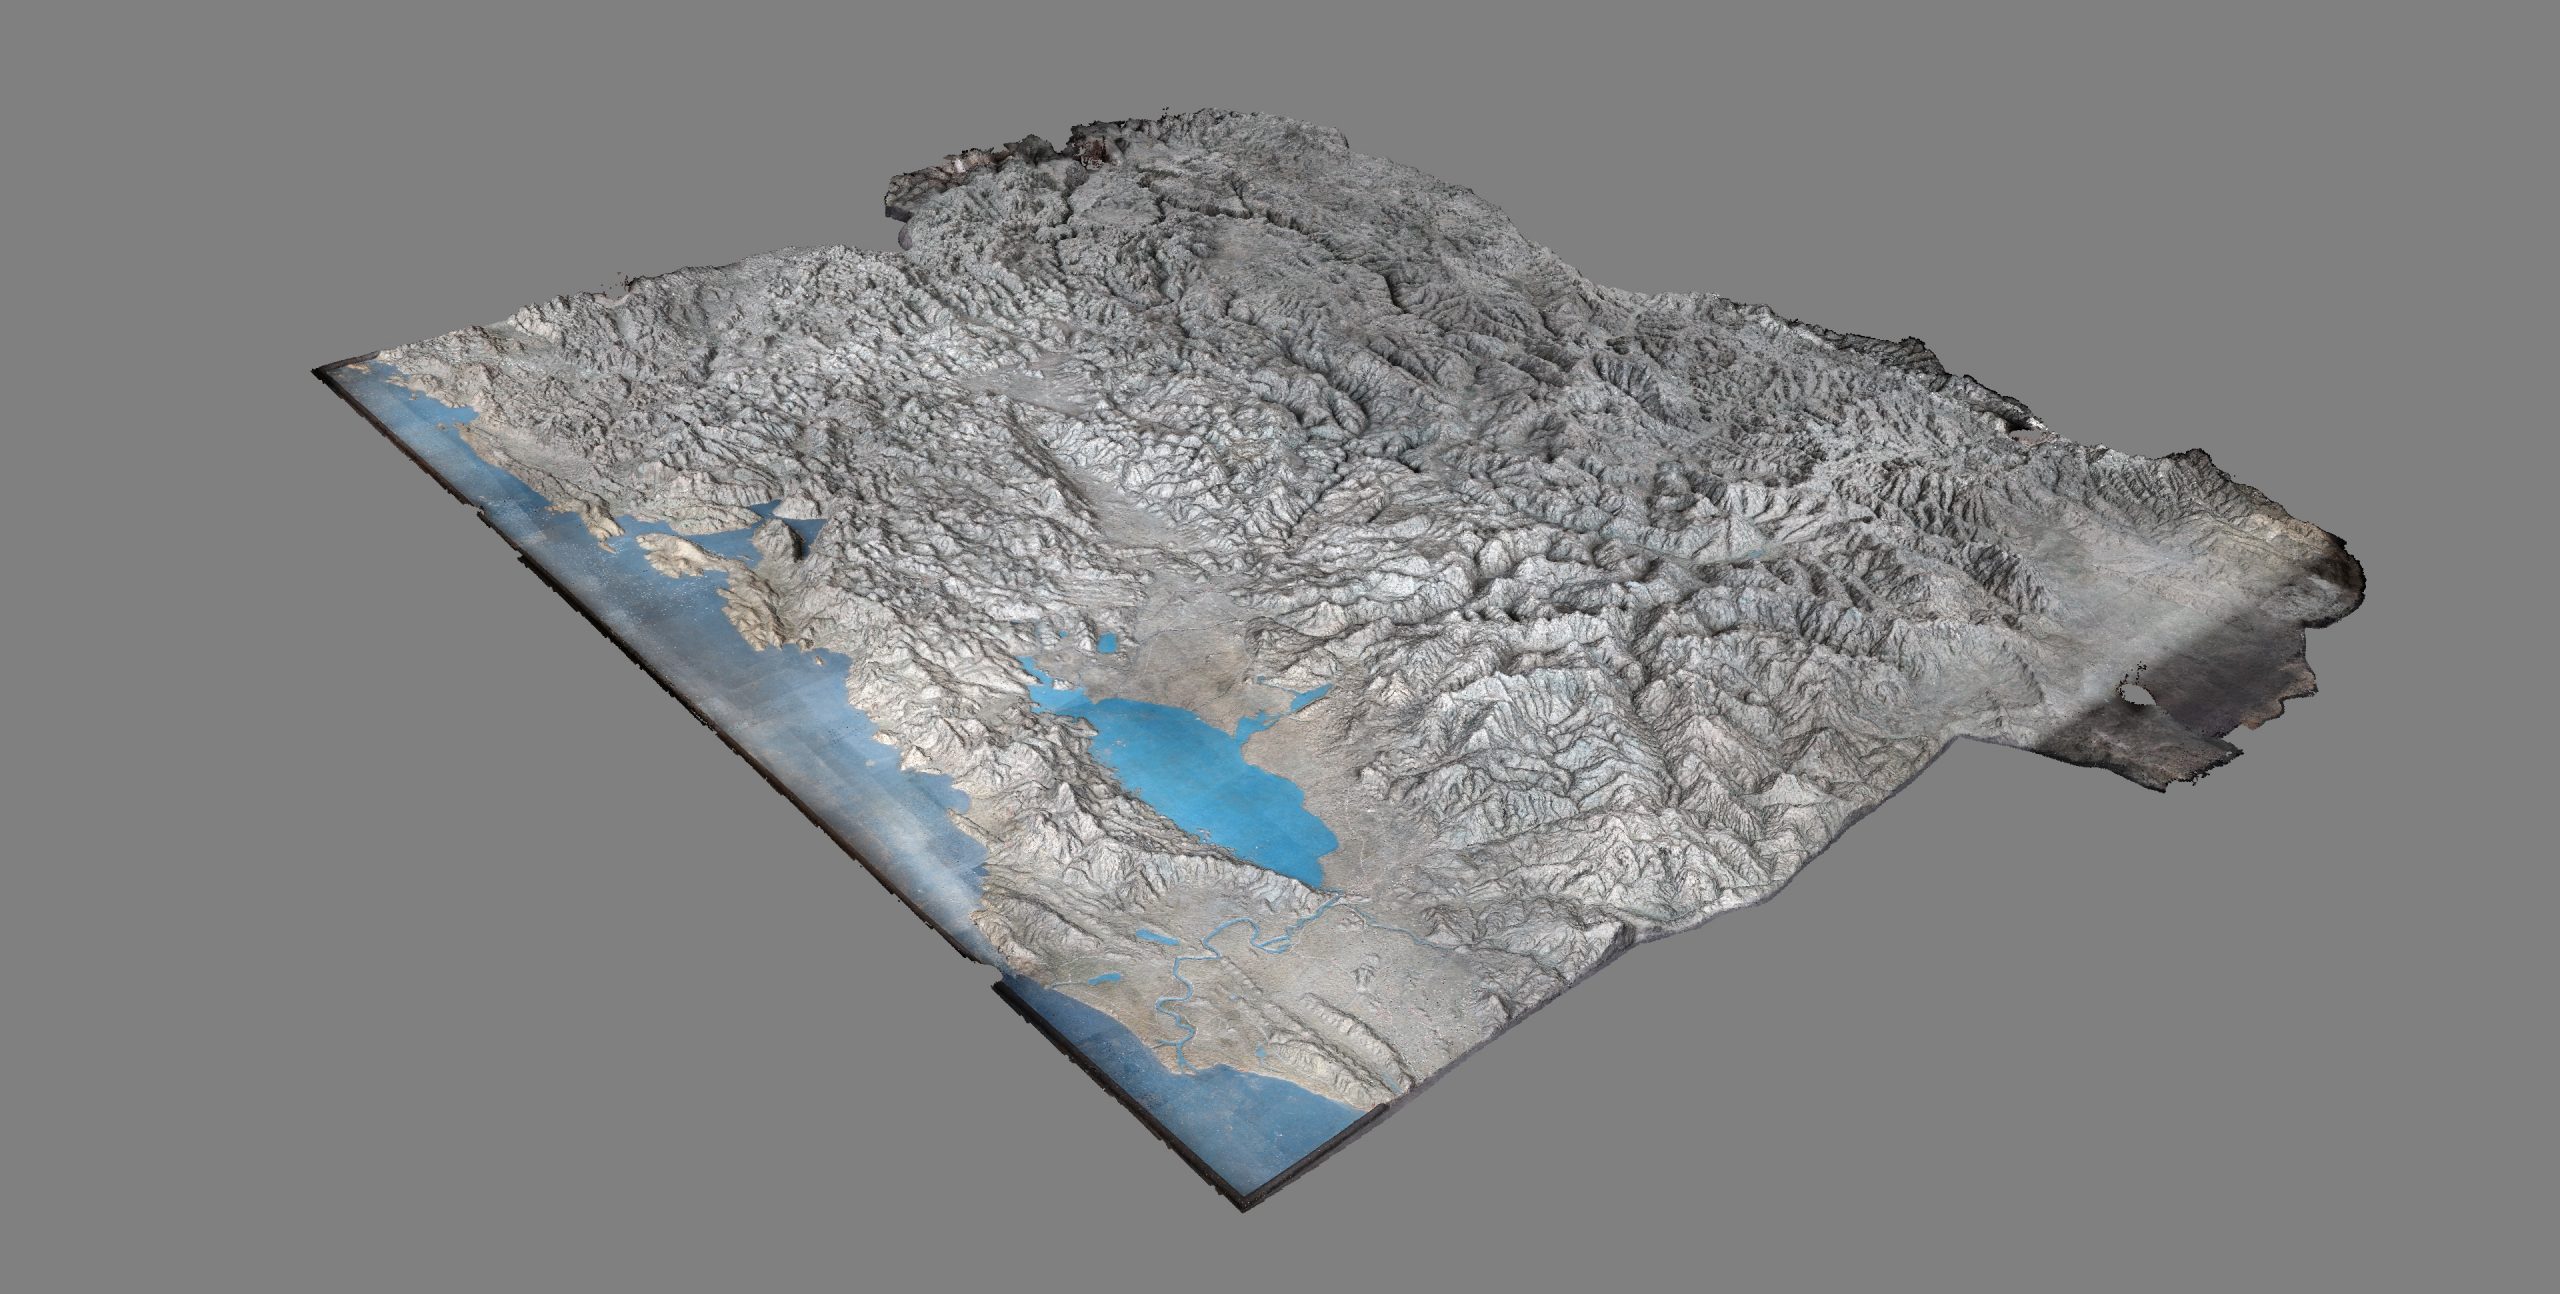 Result of the 3D Capture of the Relief Map of Montenegro